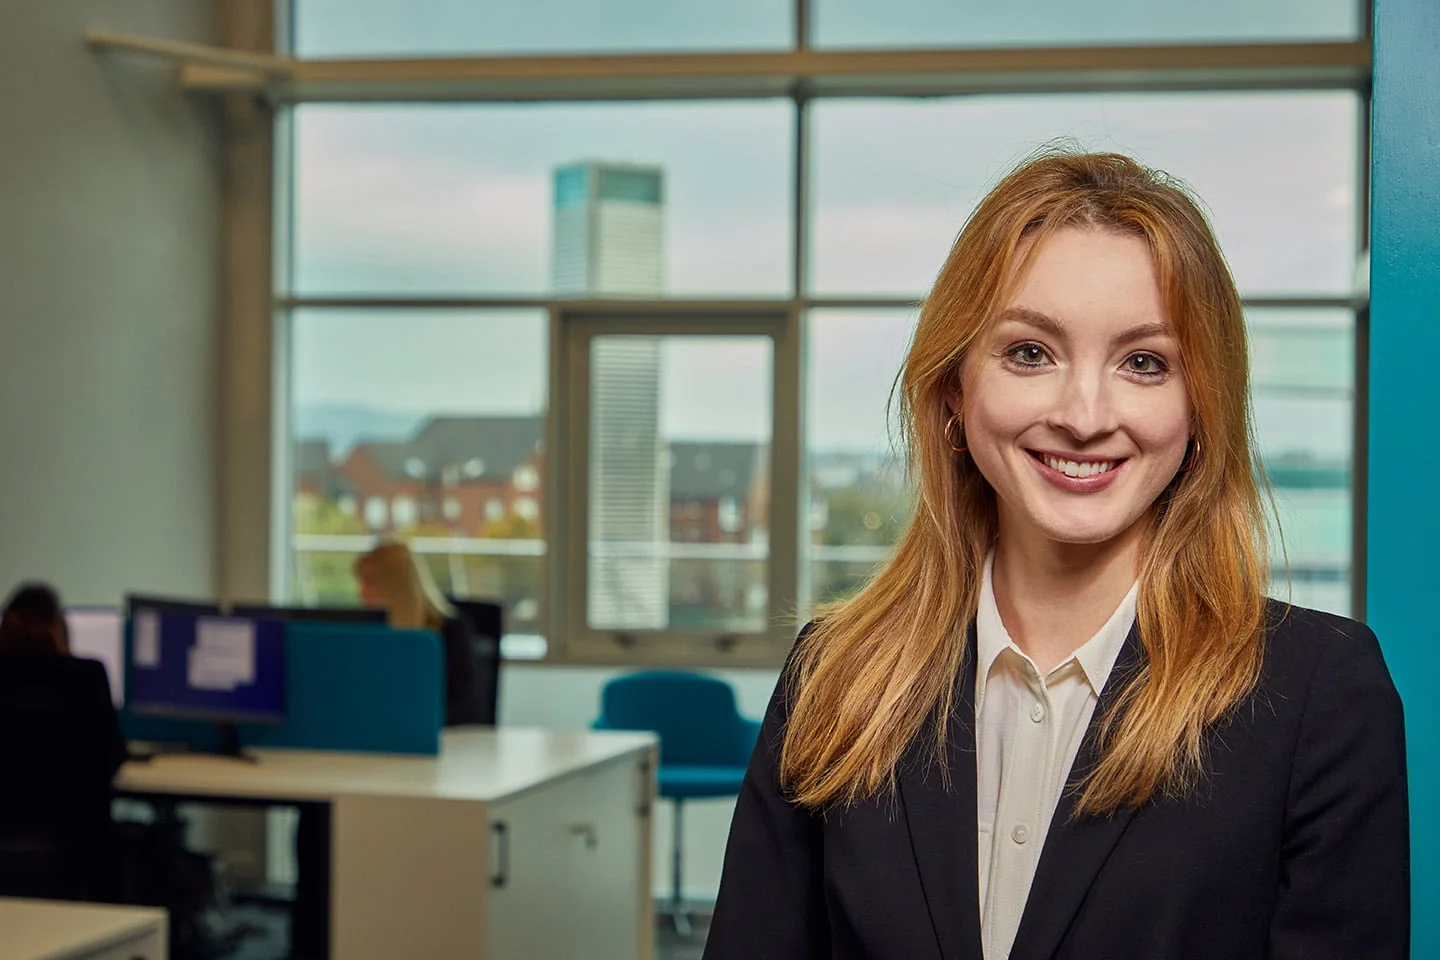 Caitriona Forde clinical negligence solicitor